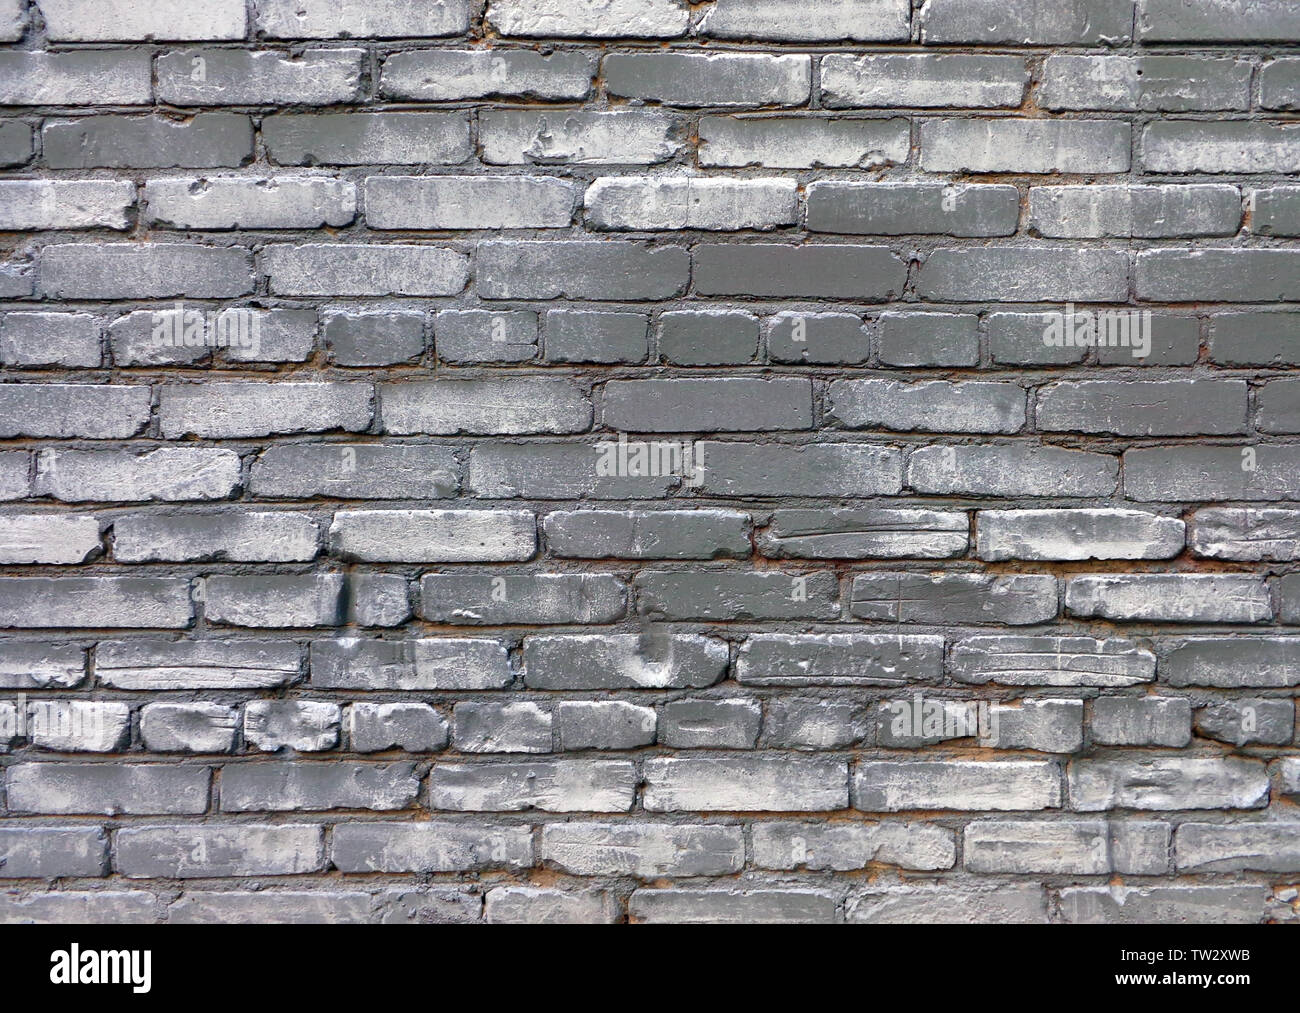 Uneven old brick wall gray painted with dark areas and white dapples, urban grunge background Stock Photo